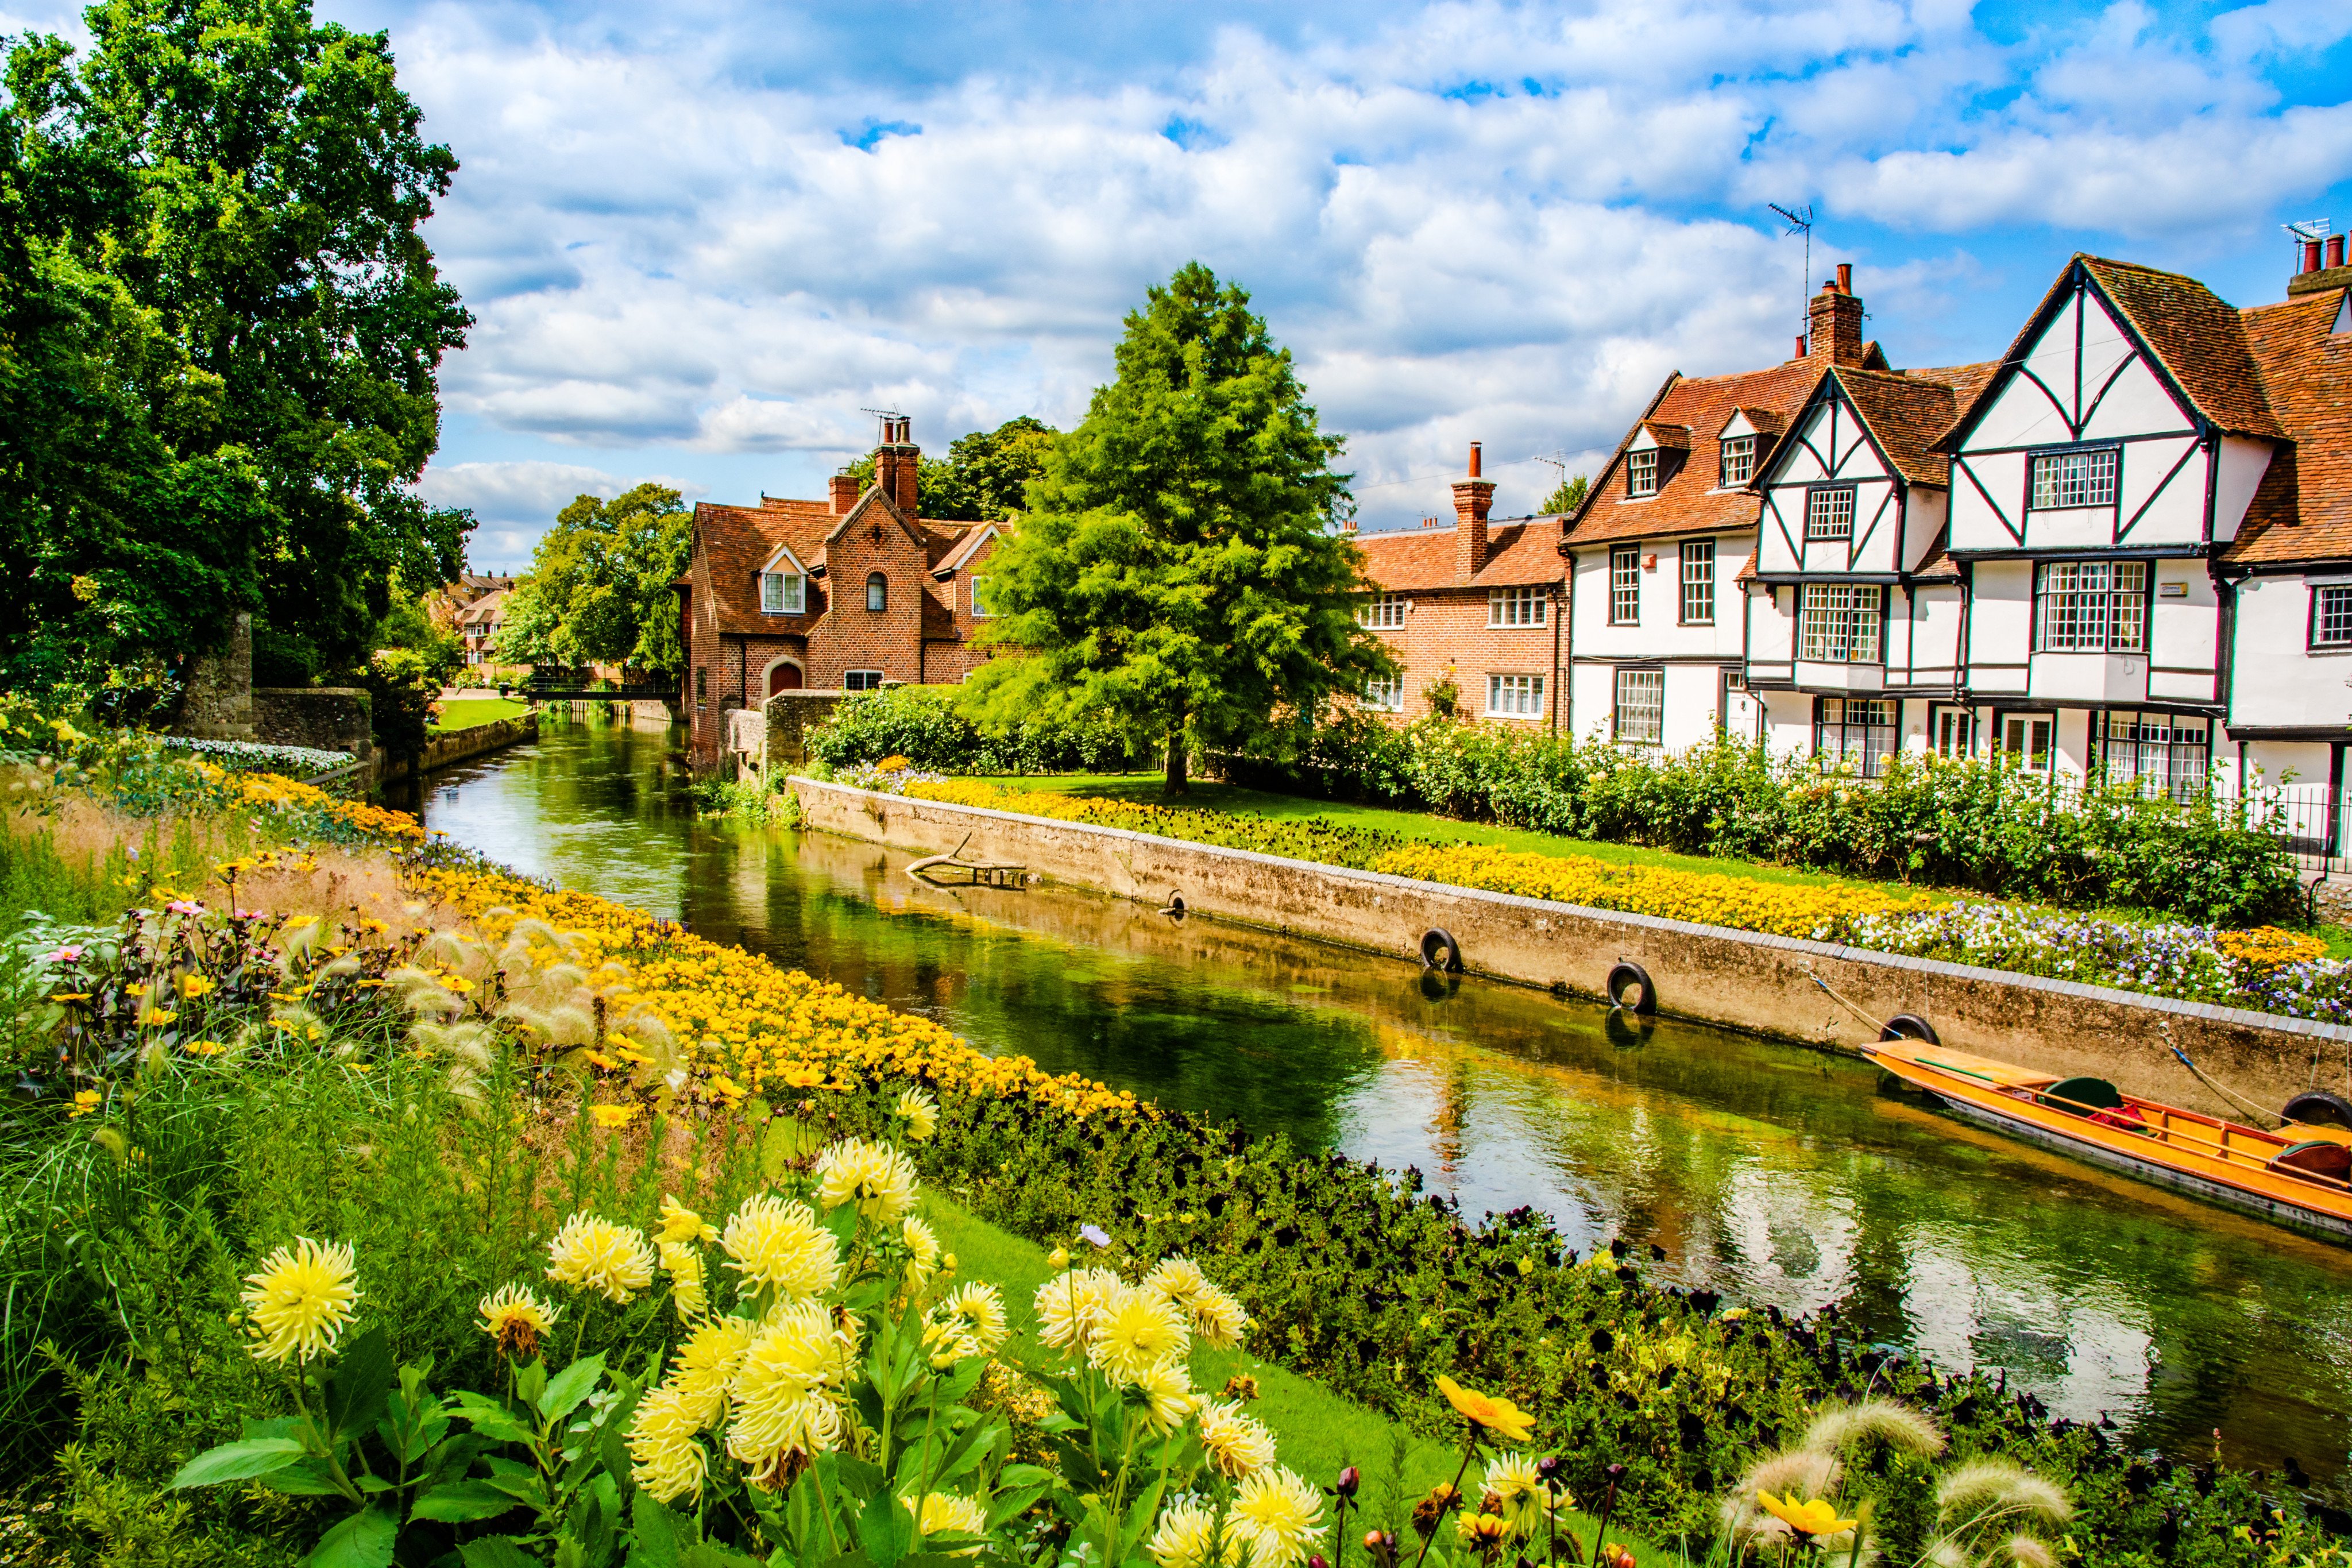 An idyllic scene in Westgate, Canterbury, Kent. Buying a house in rural Britain appealed to the writer after 28 years mostly in rented apartments in densely populated Hong Kong. Photo: Shutterstock